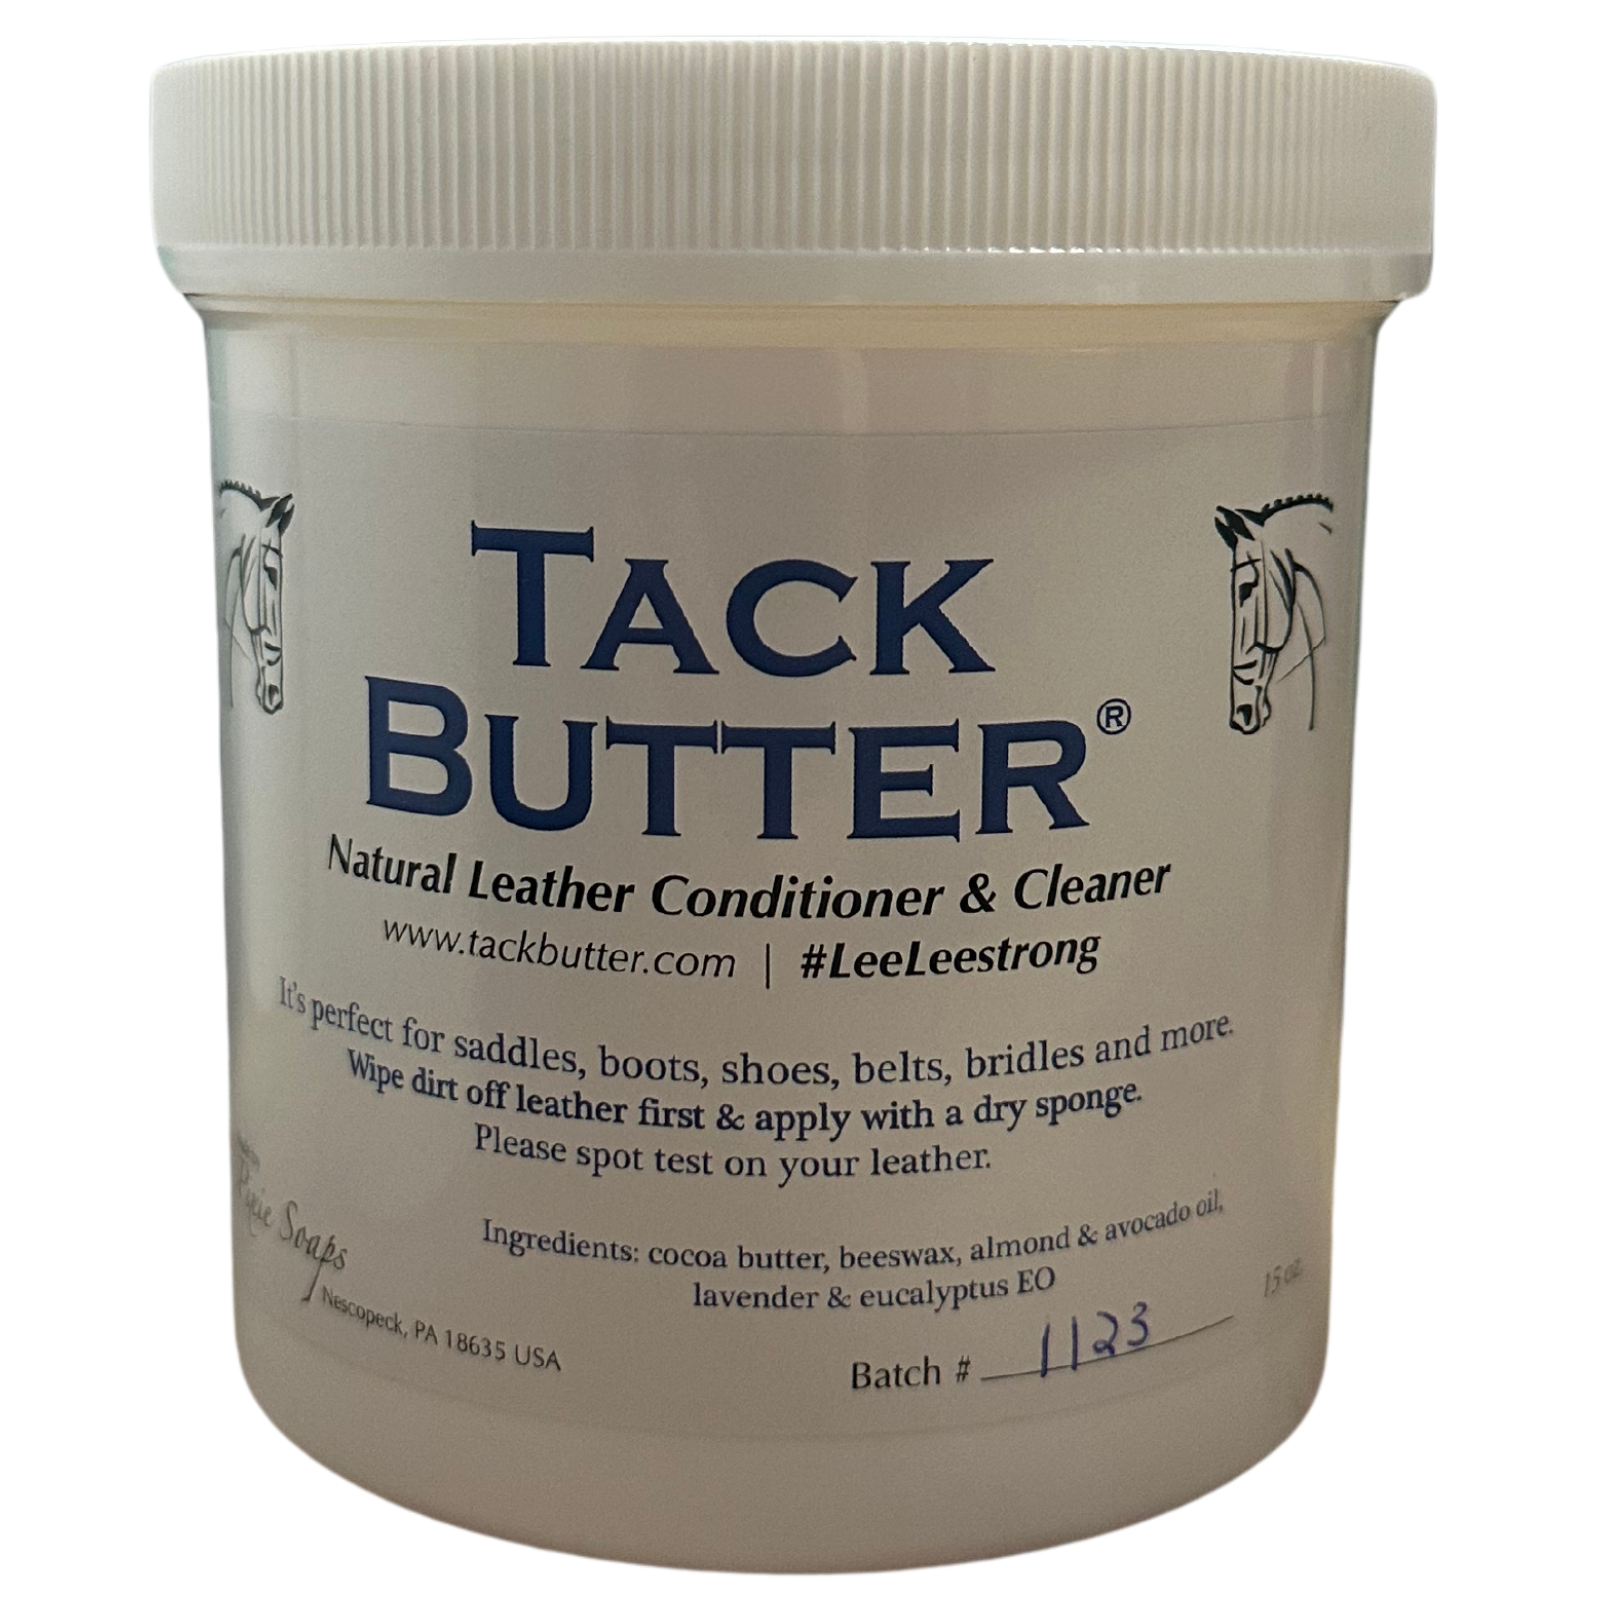 Tack Butter Natural Leather Conditioner - 15 oz.